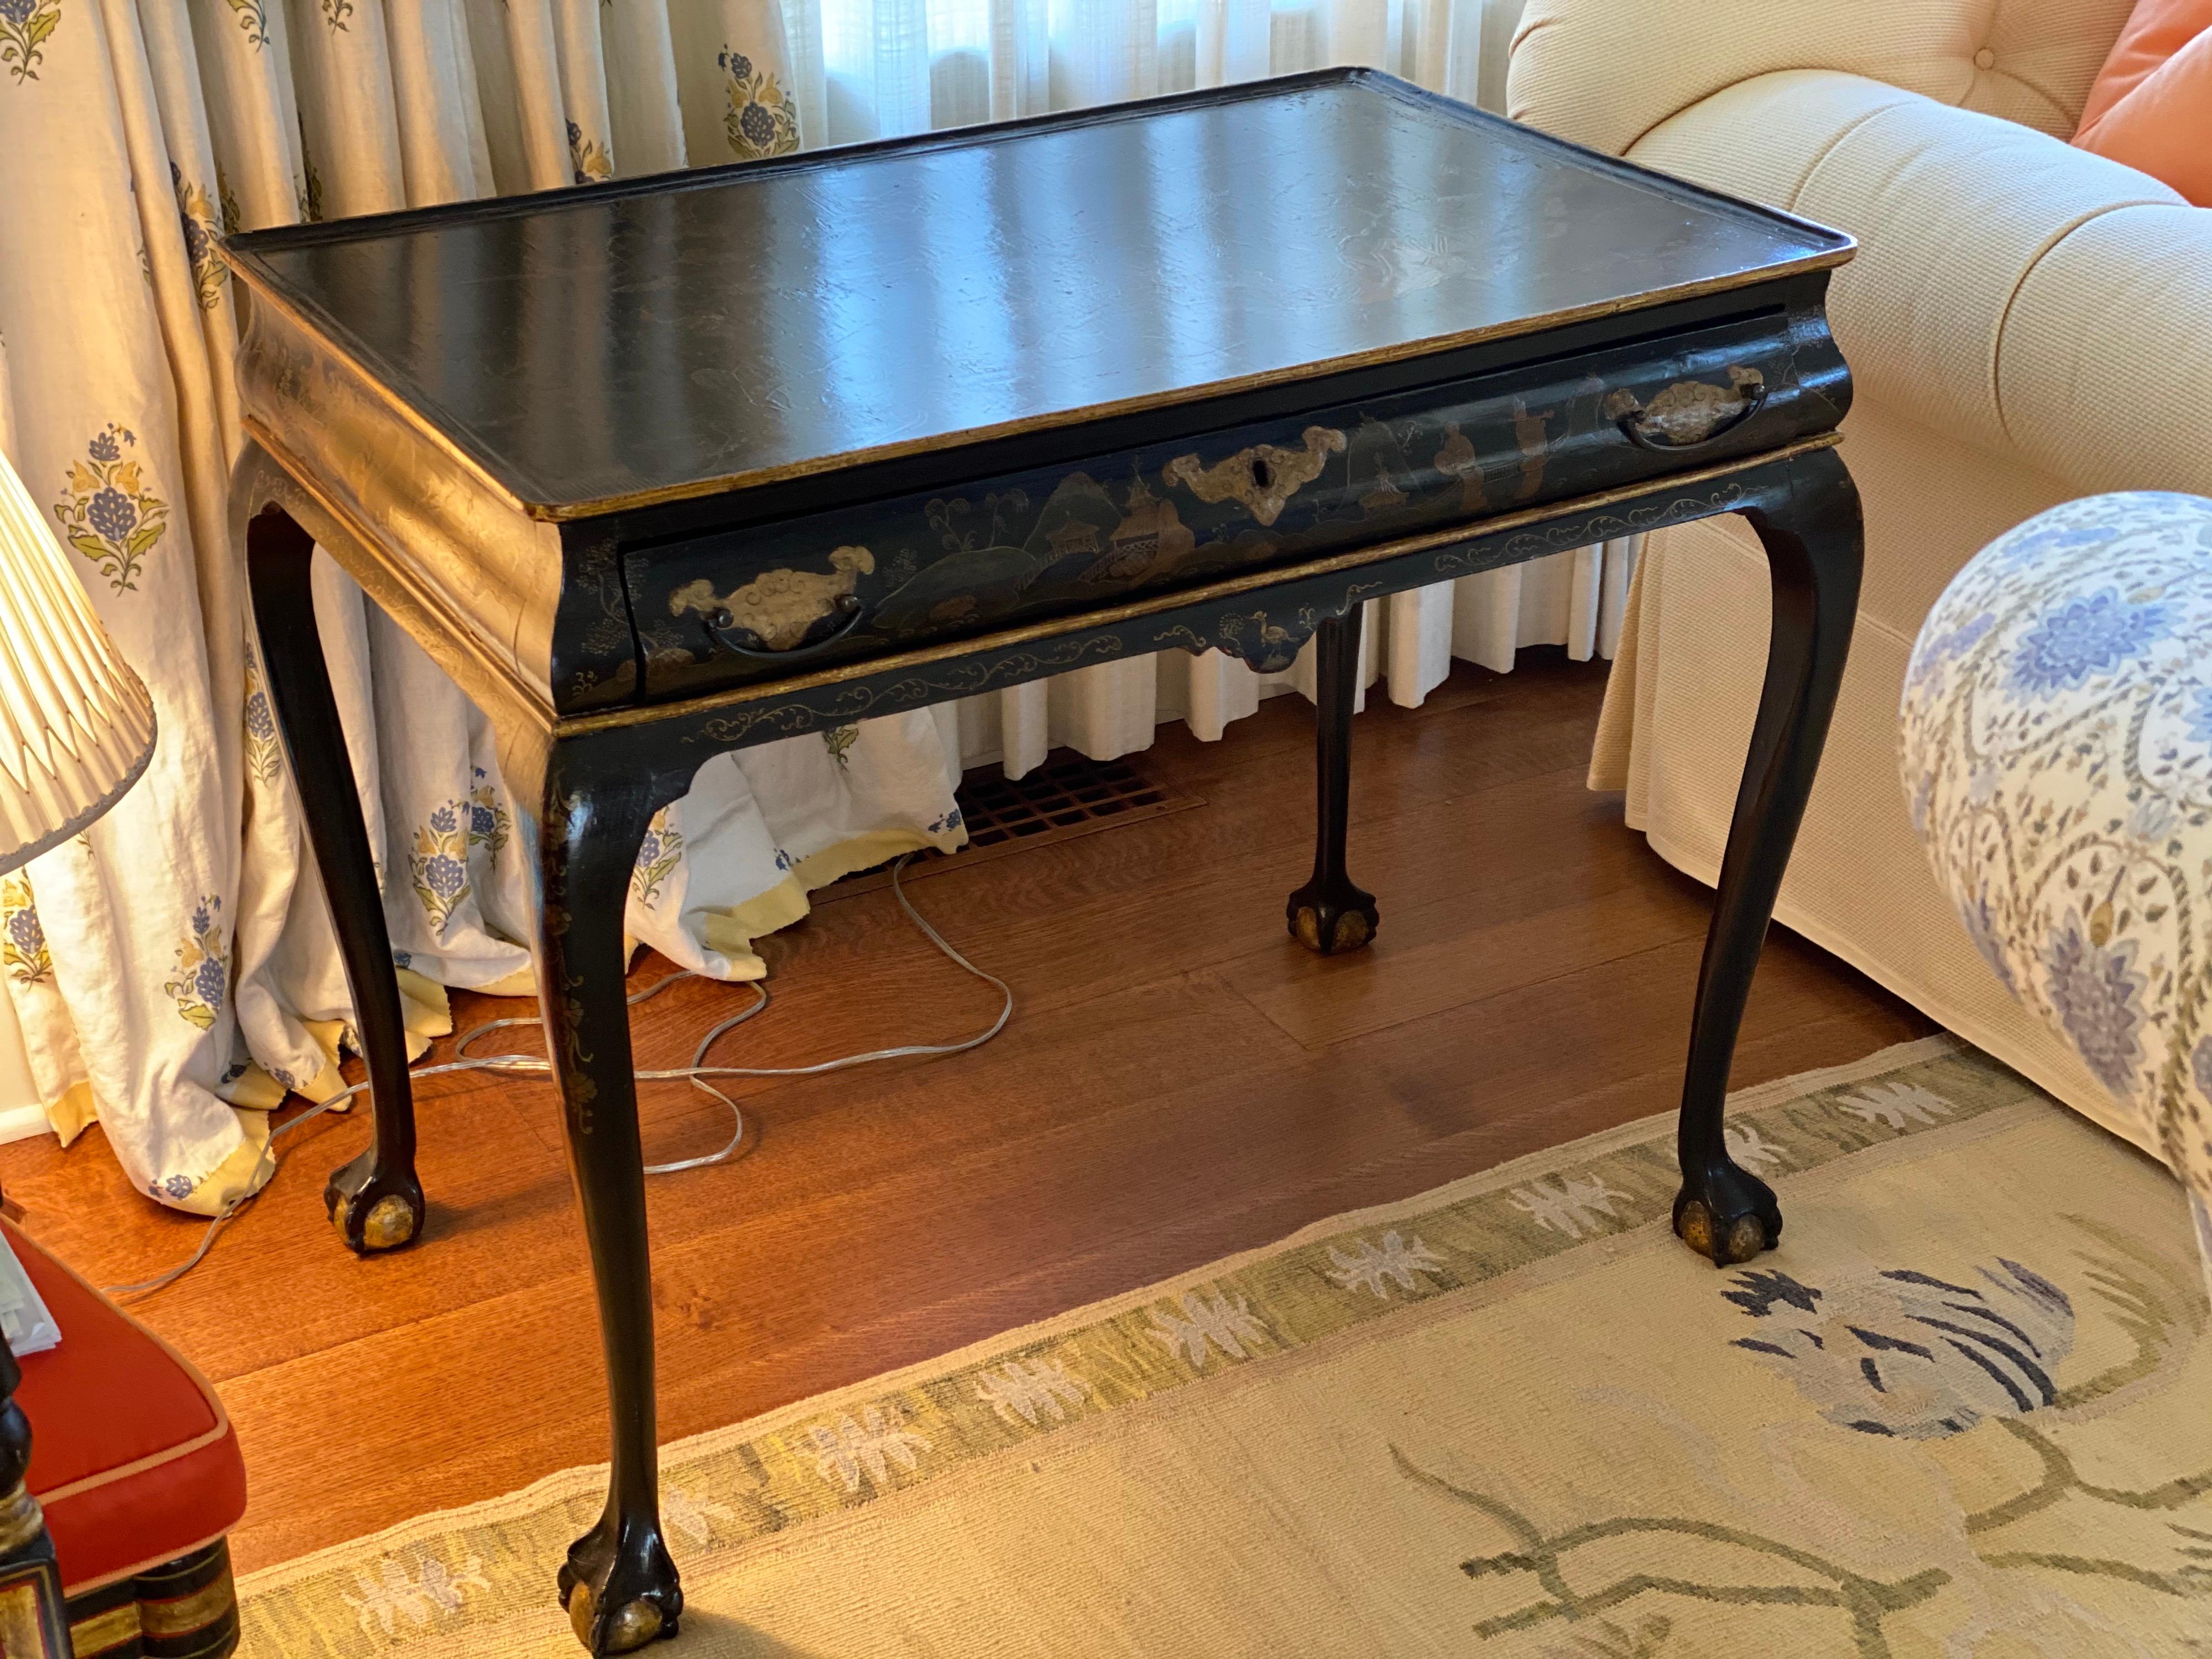 George II style parcel-gilt black japanned writing table, 19th century
Black and gold chinoiserie lacquer rectangular table with dished top above a conforming ogee-shaped frieze fitted with a drawer and raised on cabriole legs ending in claw and